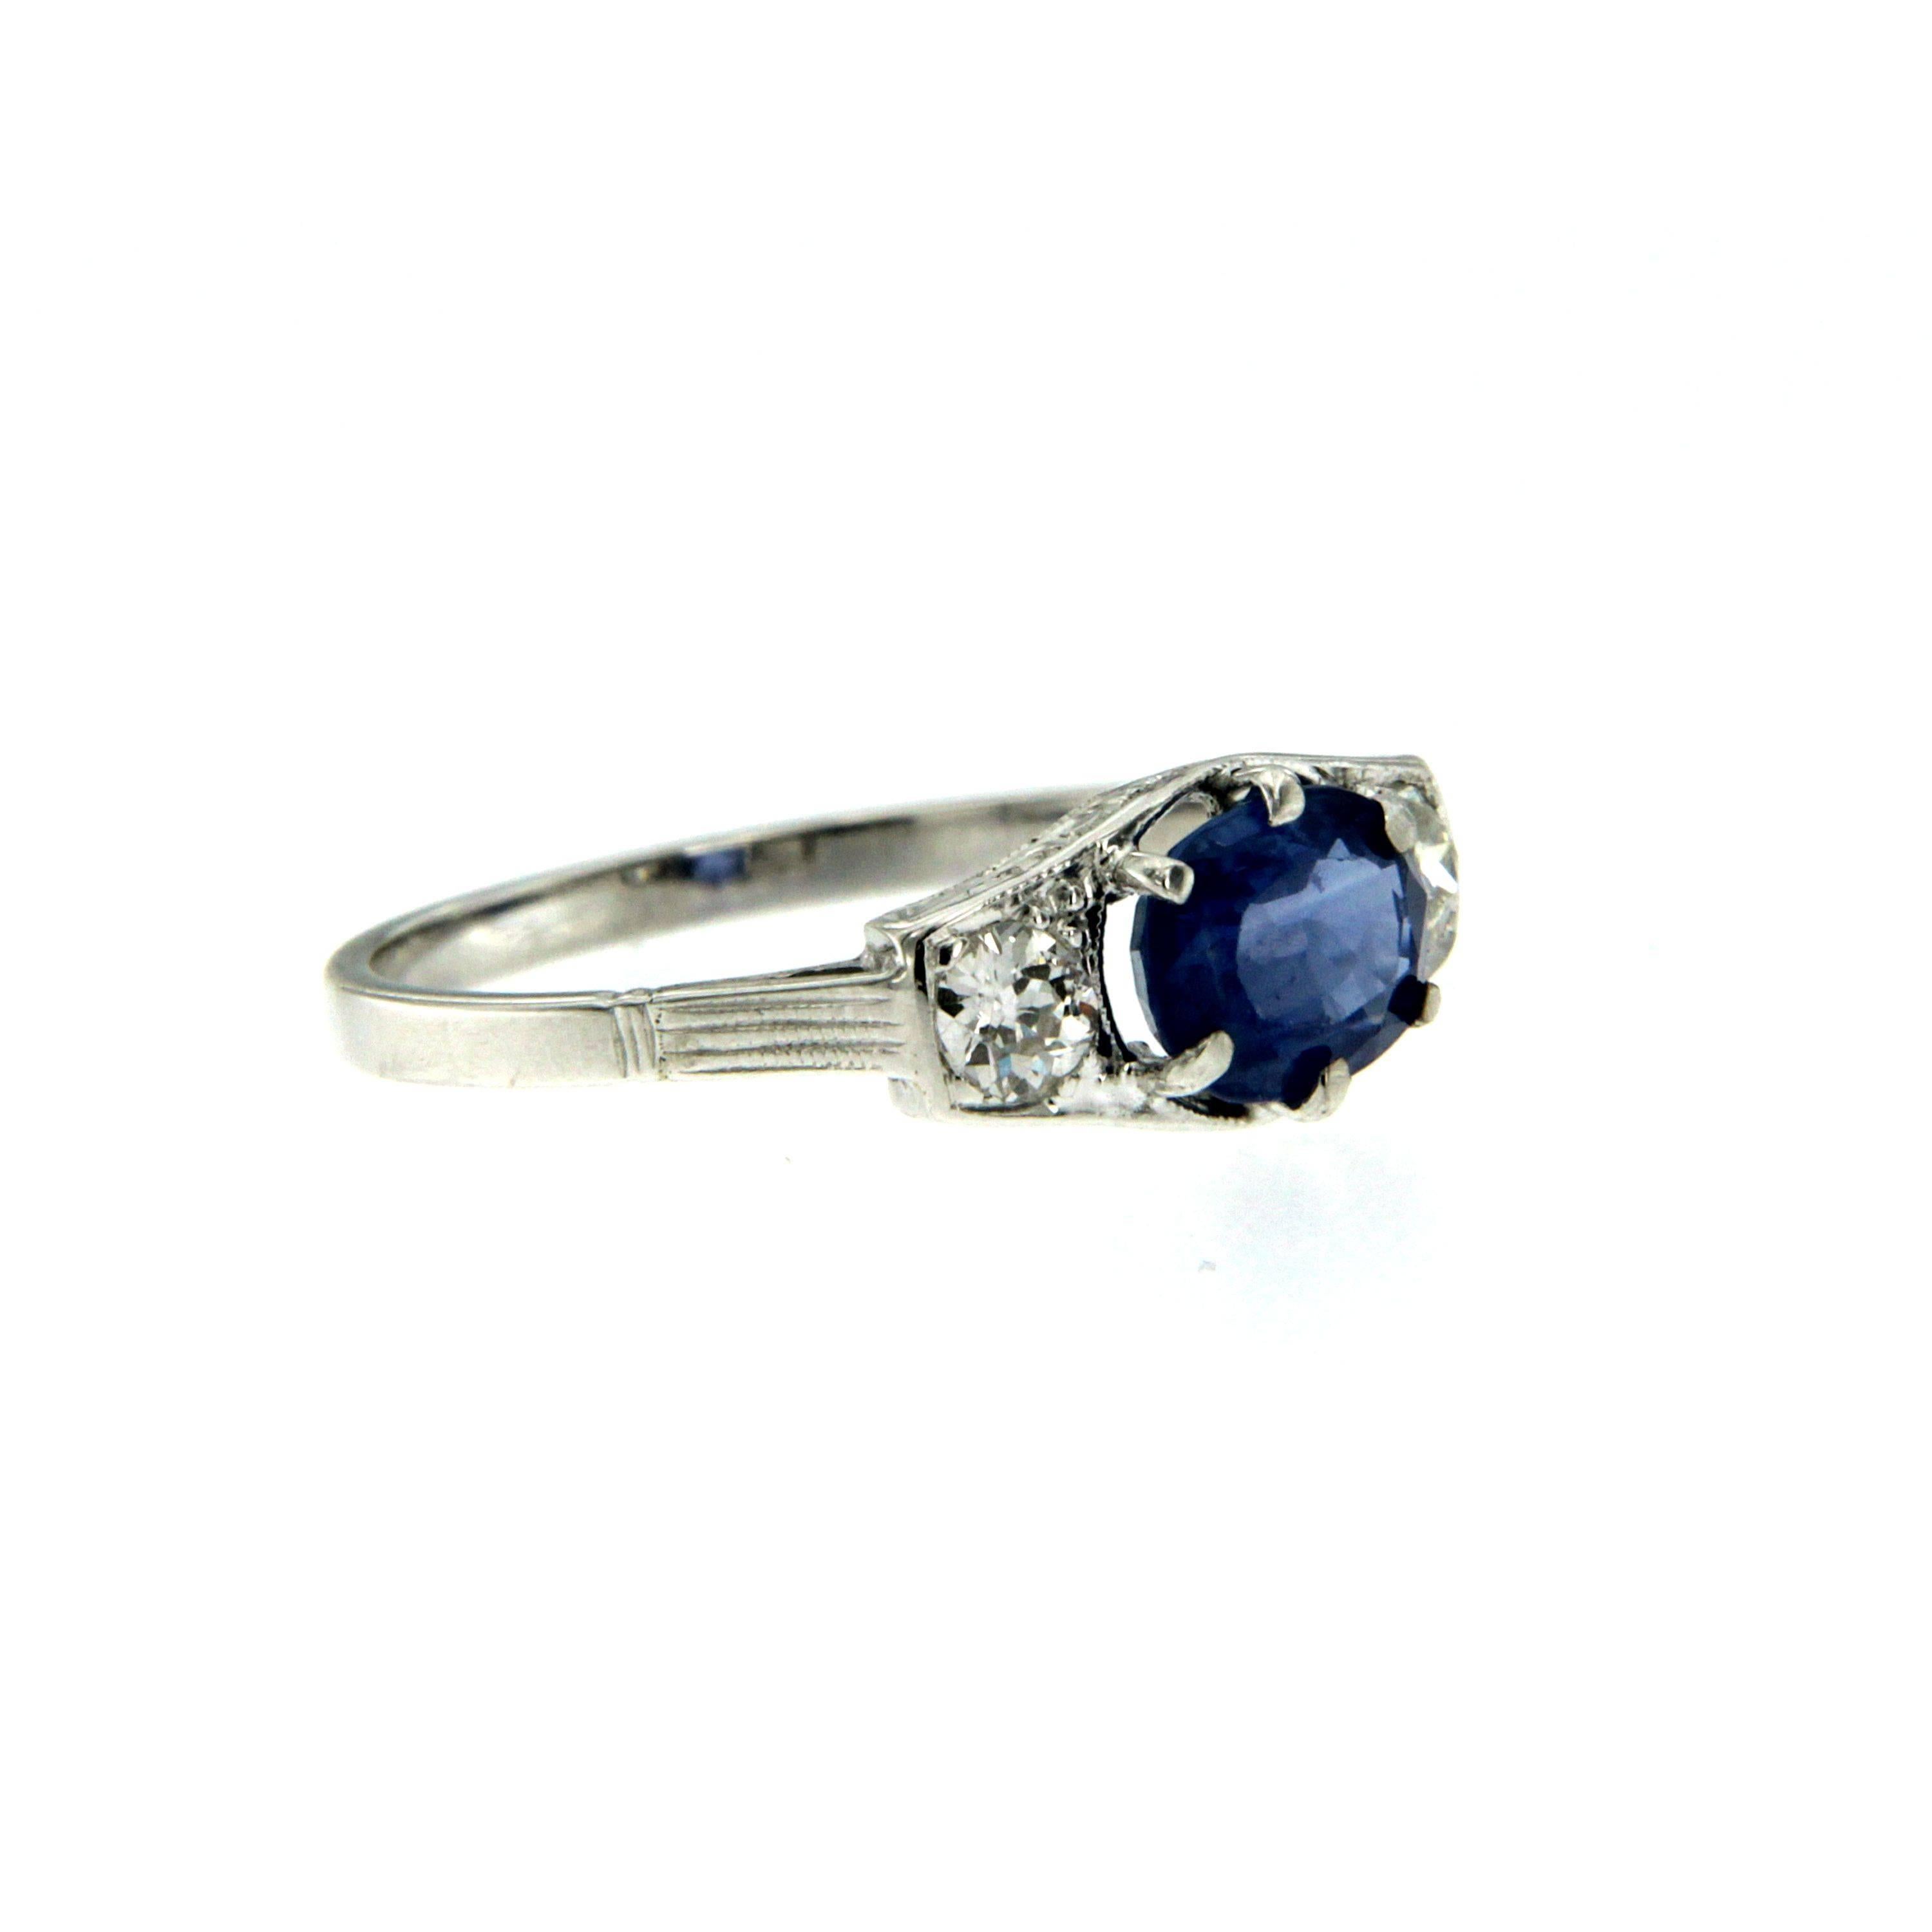 This beautiful Sapphire and Diamond Art Deco ring is hand crafted in solid 18k white gold and it is set with a stunning, Blue oval cut Natural Ceylon Sapphire weighing 0.70 carats, flanked by 2 Round brilliant cut diamonds colorless Vvs clarity